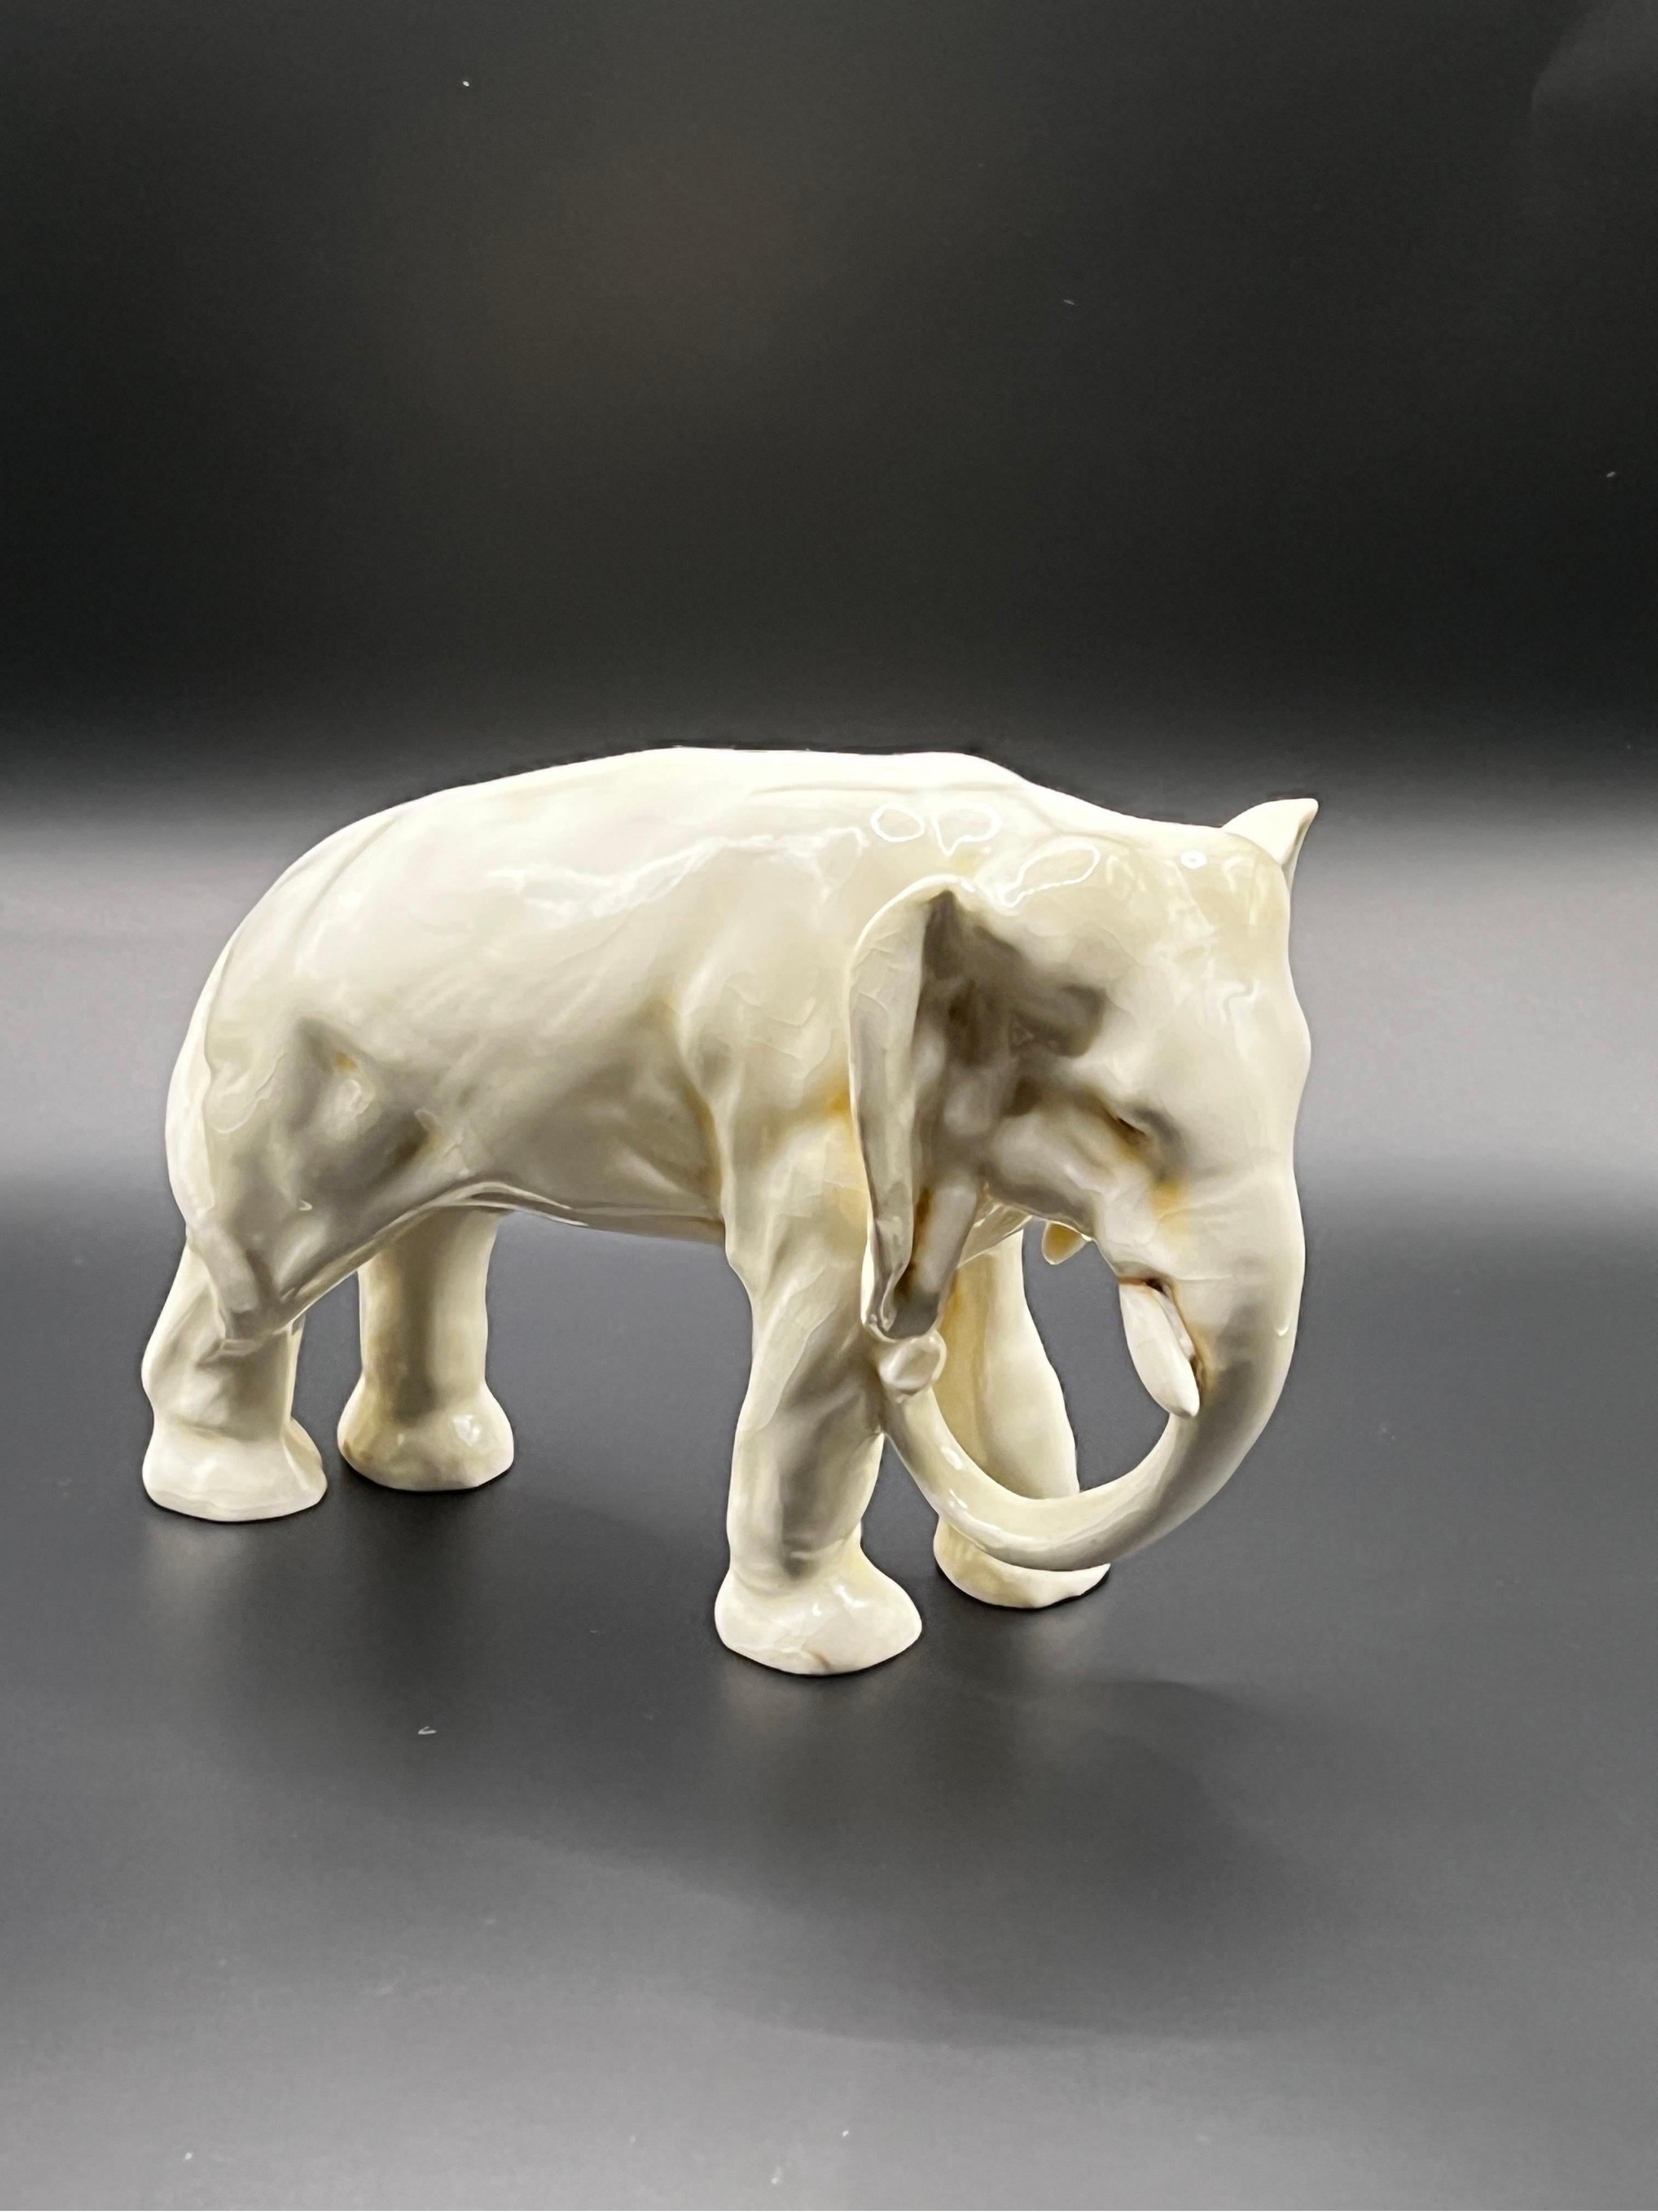 Discover a remarkable and highly coveted treasure: an exquisite biscuit porcelain statue of an elephant, originating from the prestigious Bohemian porcelain factory, Royal Dux, crafted in the late 1930ies. Impeccably preserved, this stunning piece